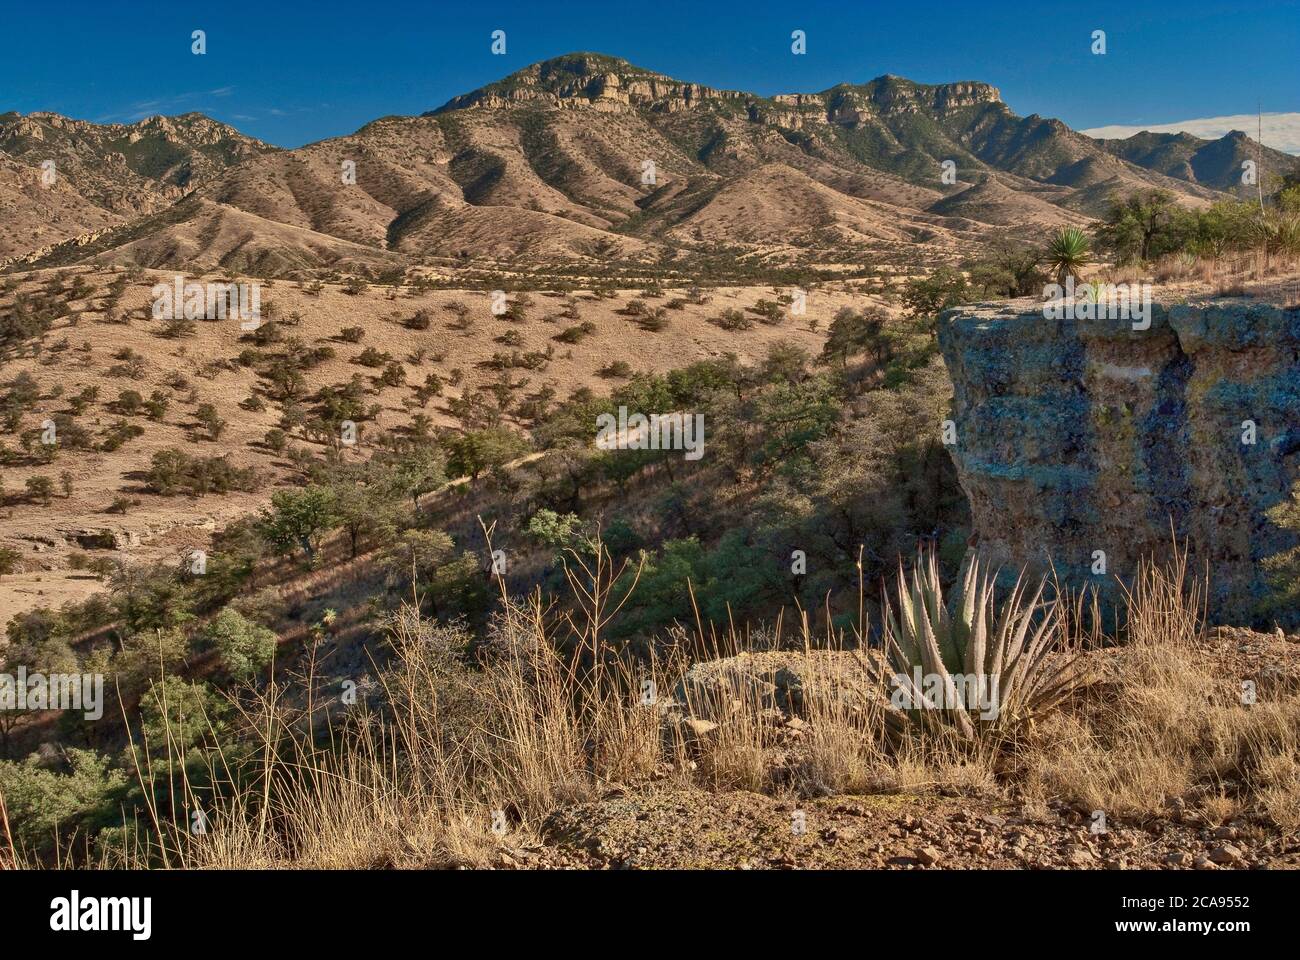 Atascosa Mountains at Sonoran Desert seen from Ruby Road near Mexican border and ghost town of Ruby, Arizona, USA Stock Photo